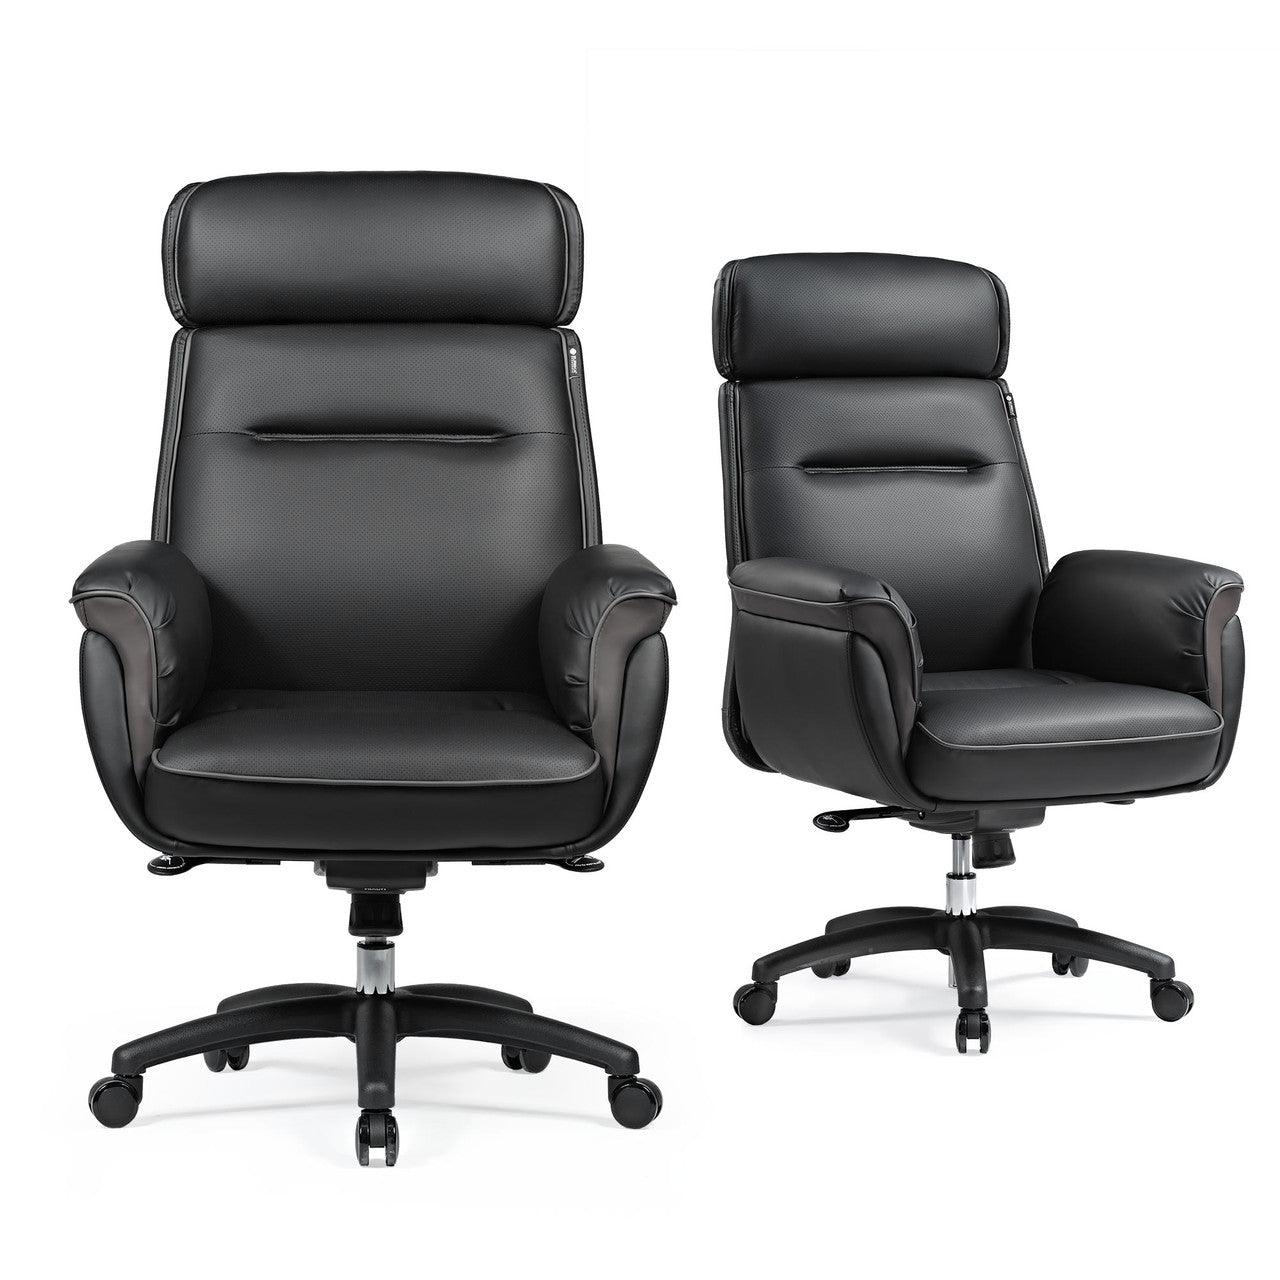 Eureka Royal, Comfy Leather Executive Office Chair With High Back and Lumbar Support, Black, Executive Office, Leather Padded Structure, Front and Angle View